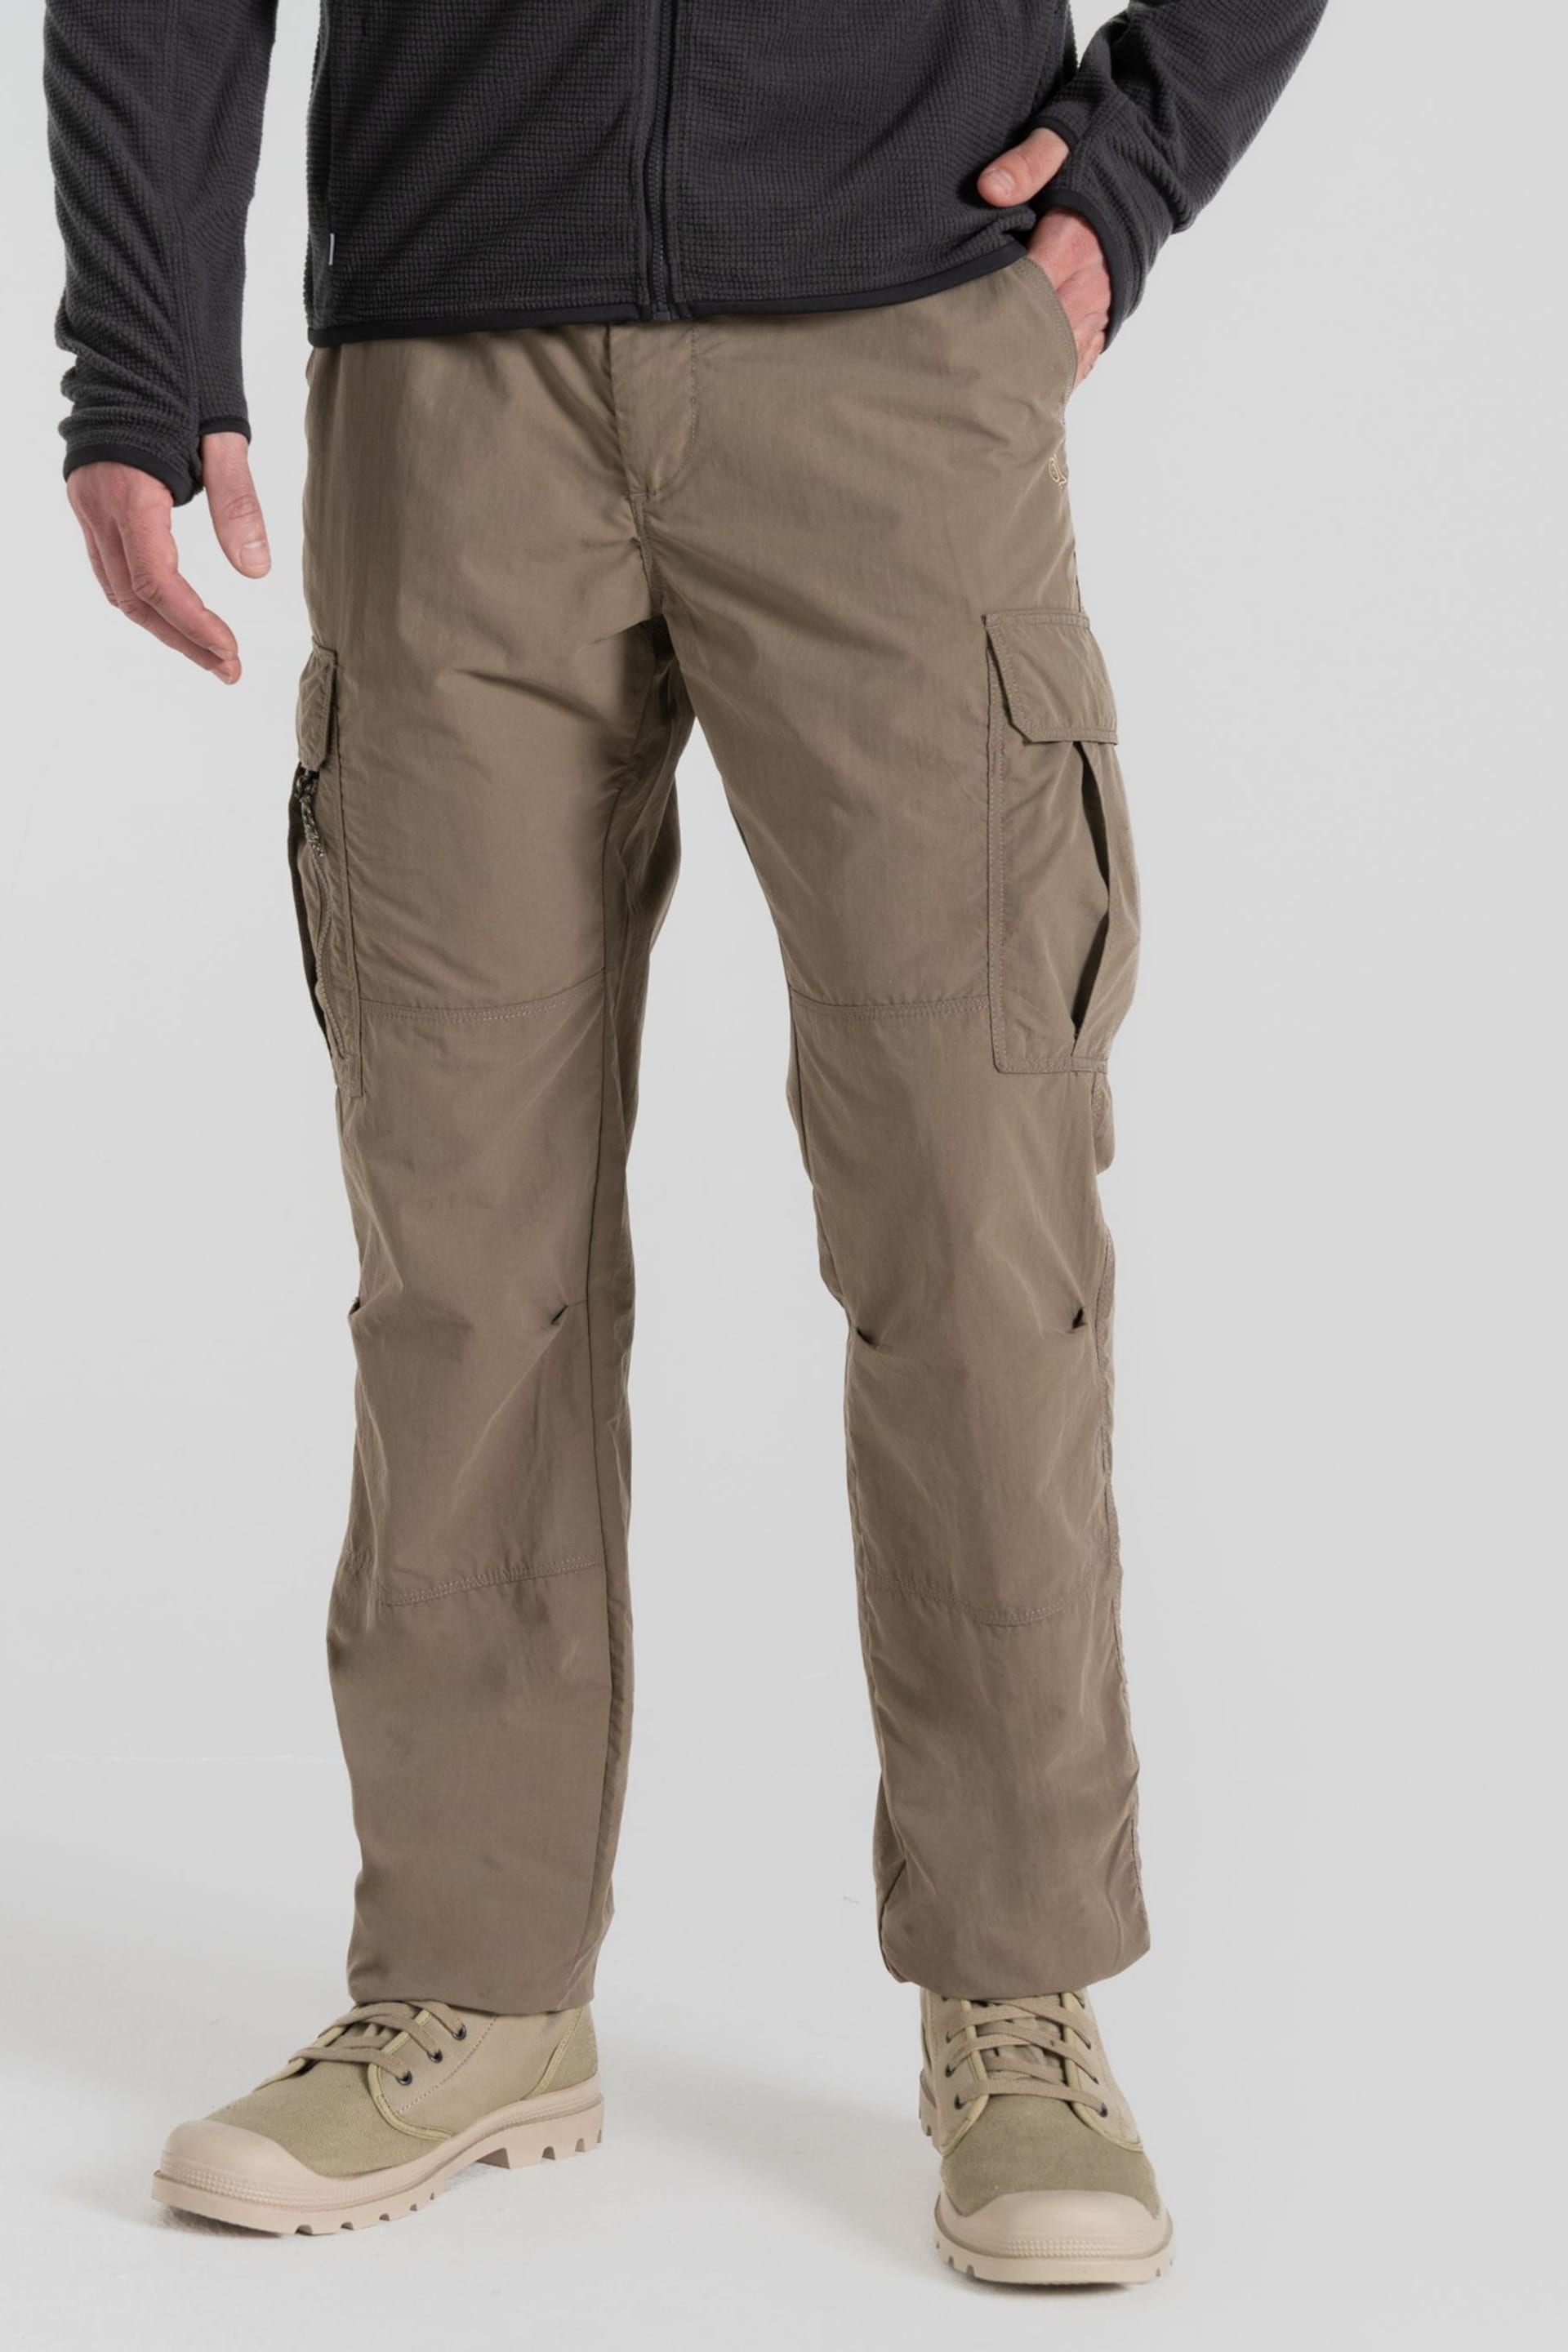 Craghoppers Natuiral Nosilife Cargo Trousers - Image 1 of 7